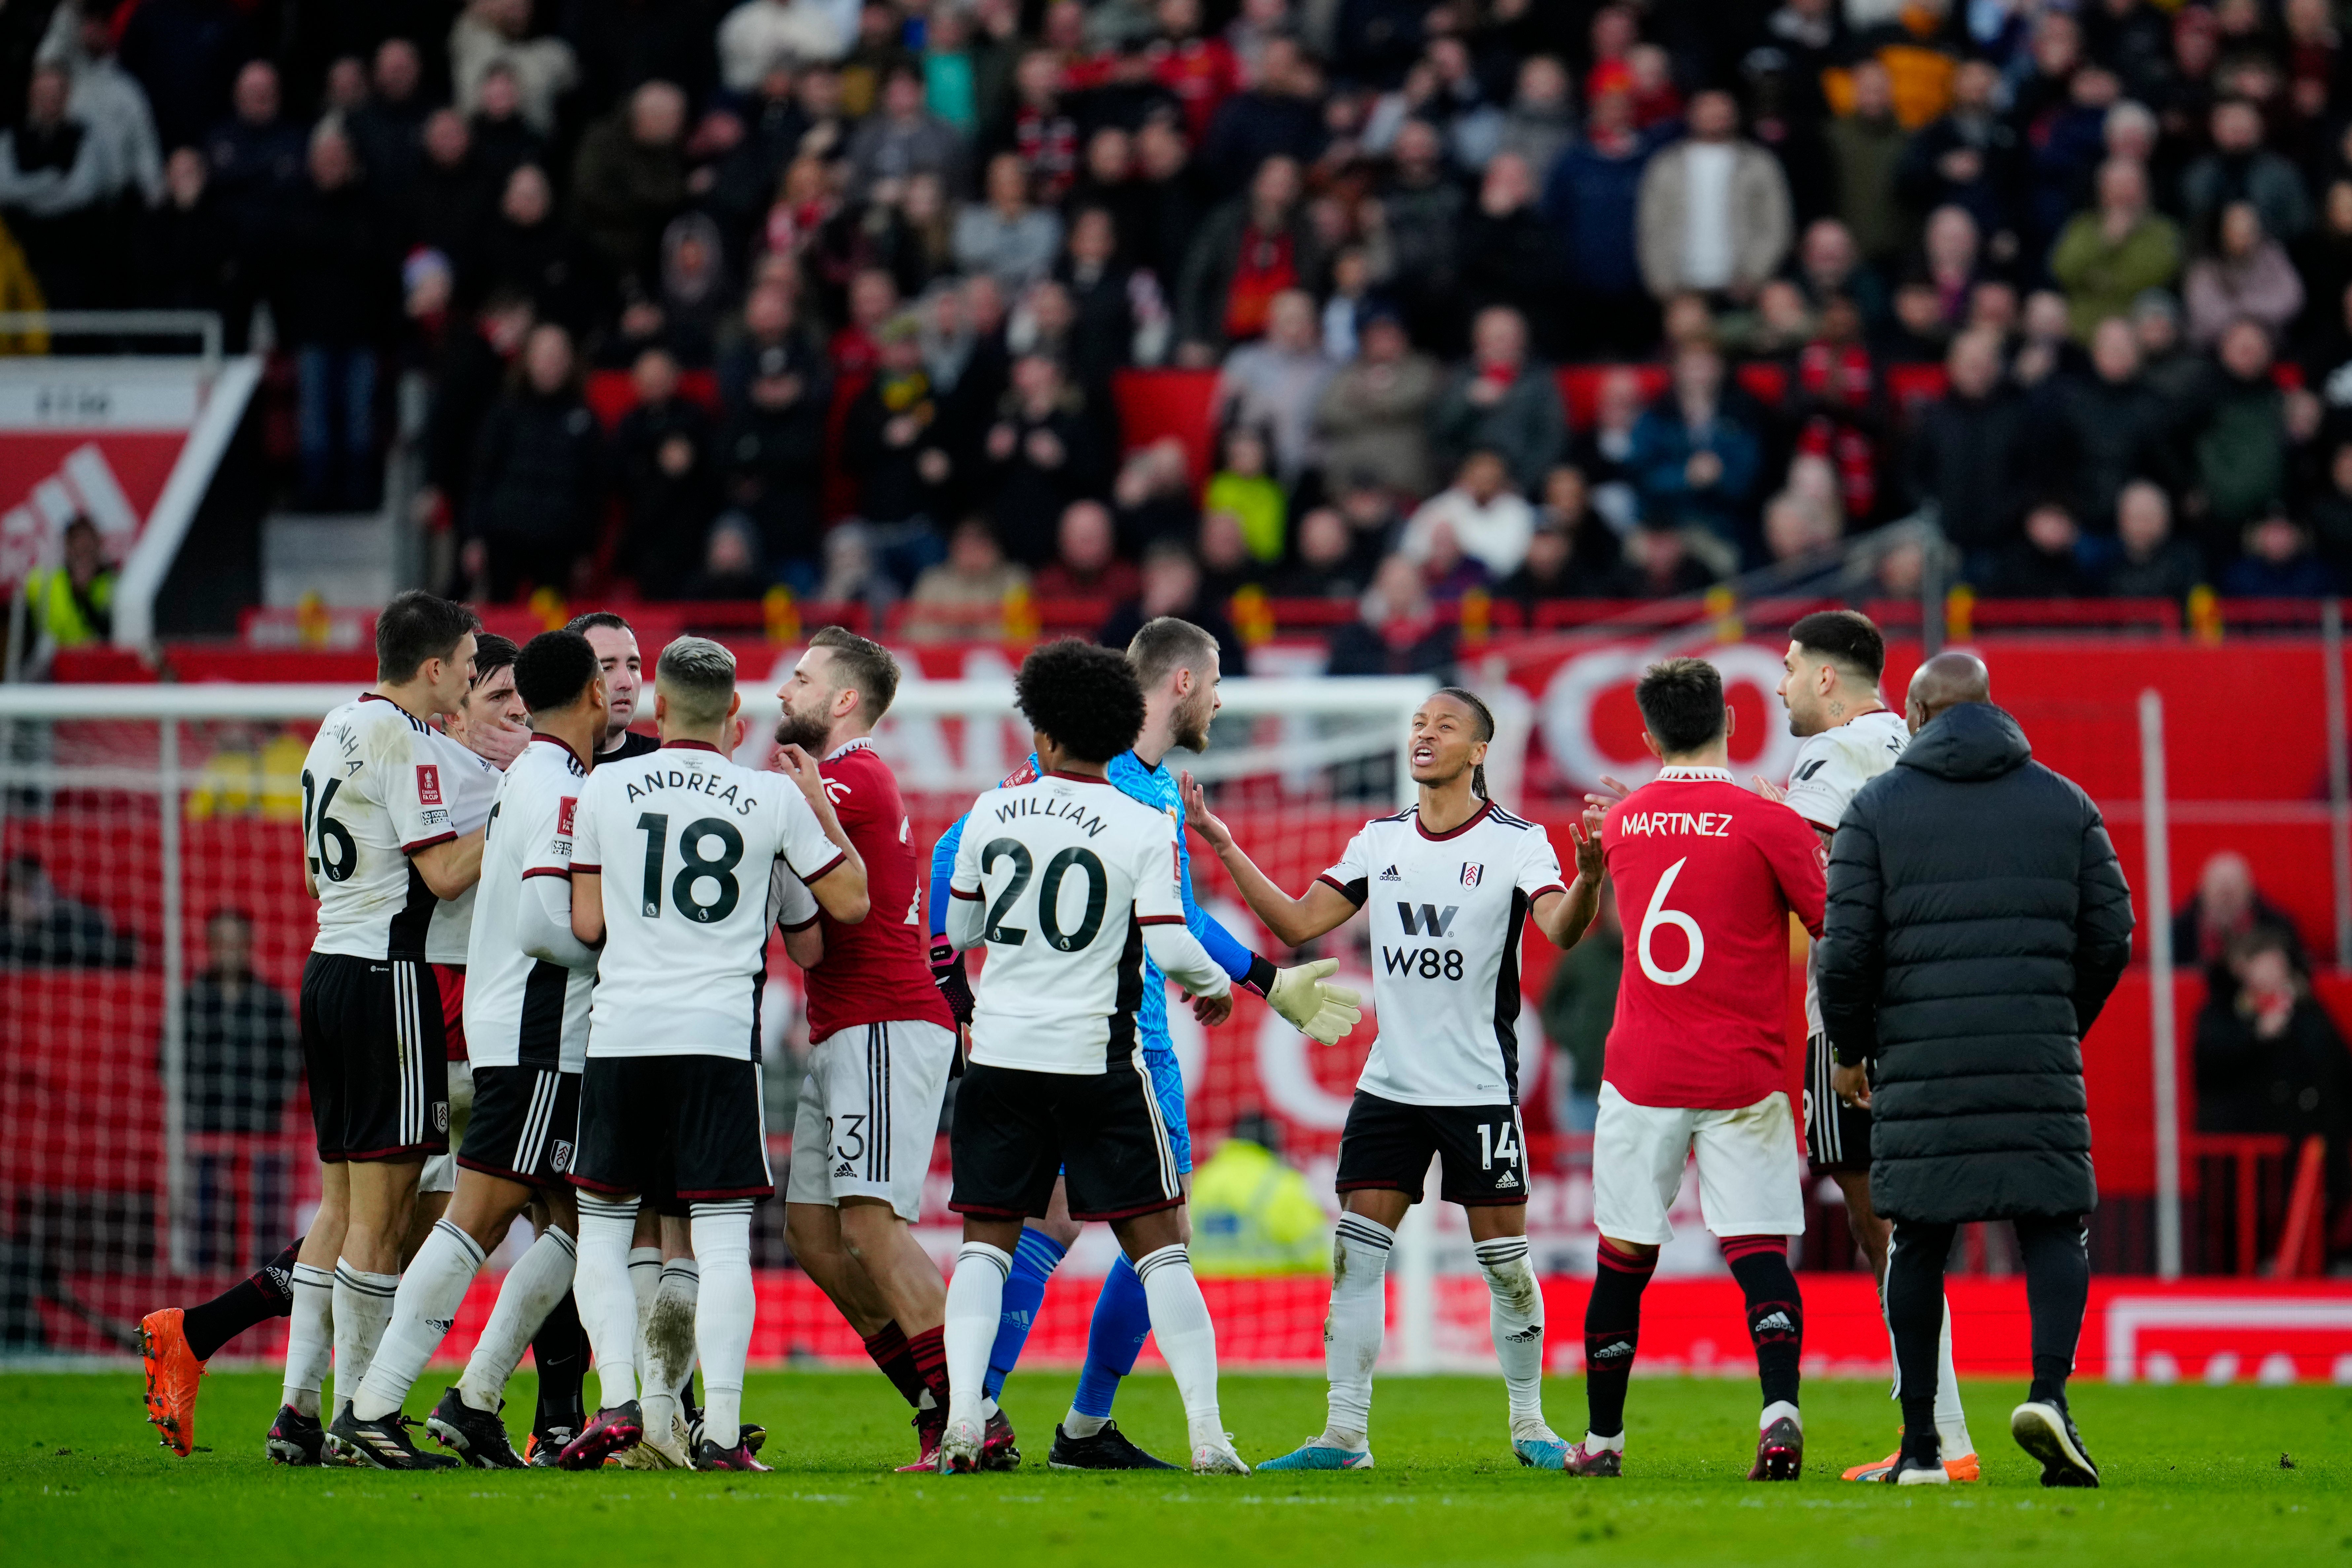 Fulham imploded when a FA Cup semi-final was still possible when they went down to 10 players